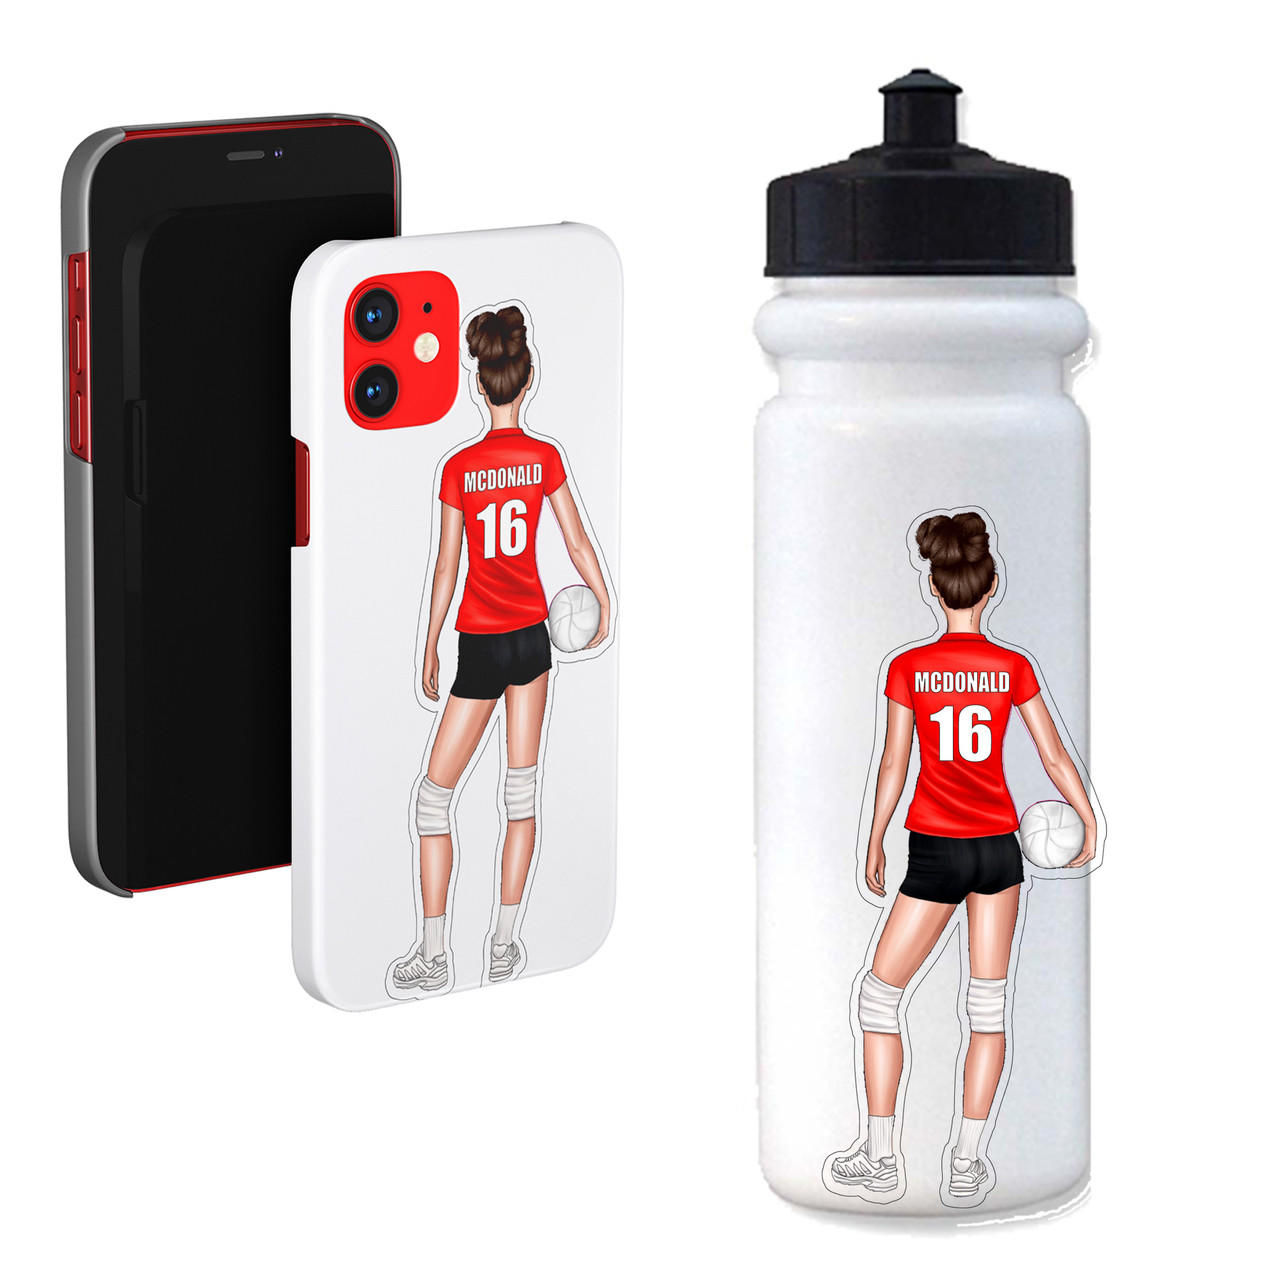 Personalized Female Volleyball Sticker Questions & Answers